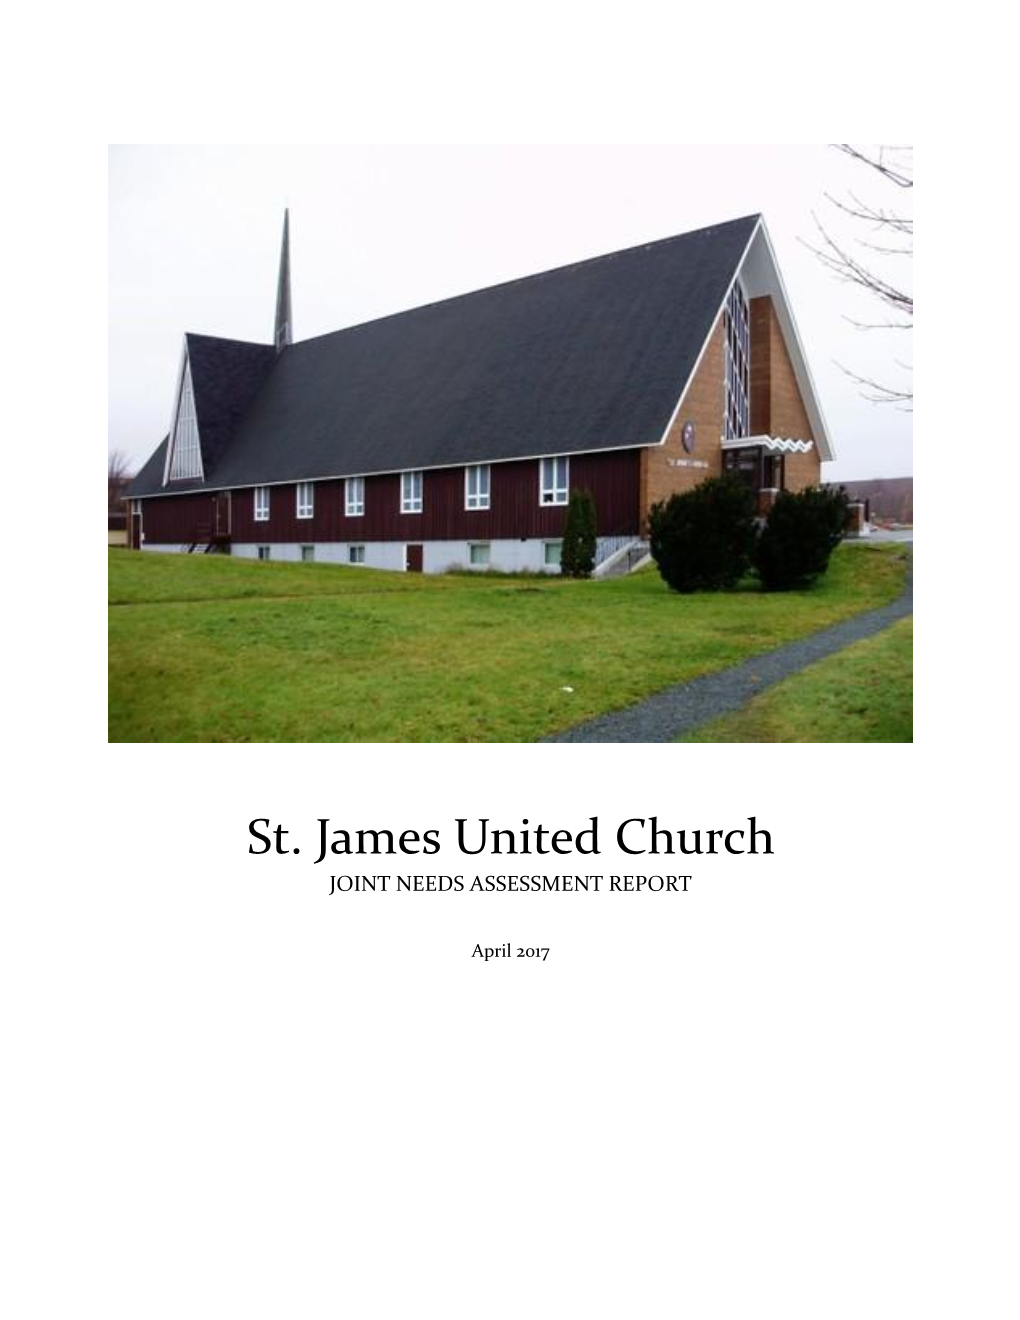 St. James United Church JOINT NEEDS ASSESSMENT REPORT